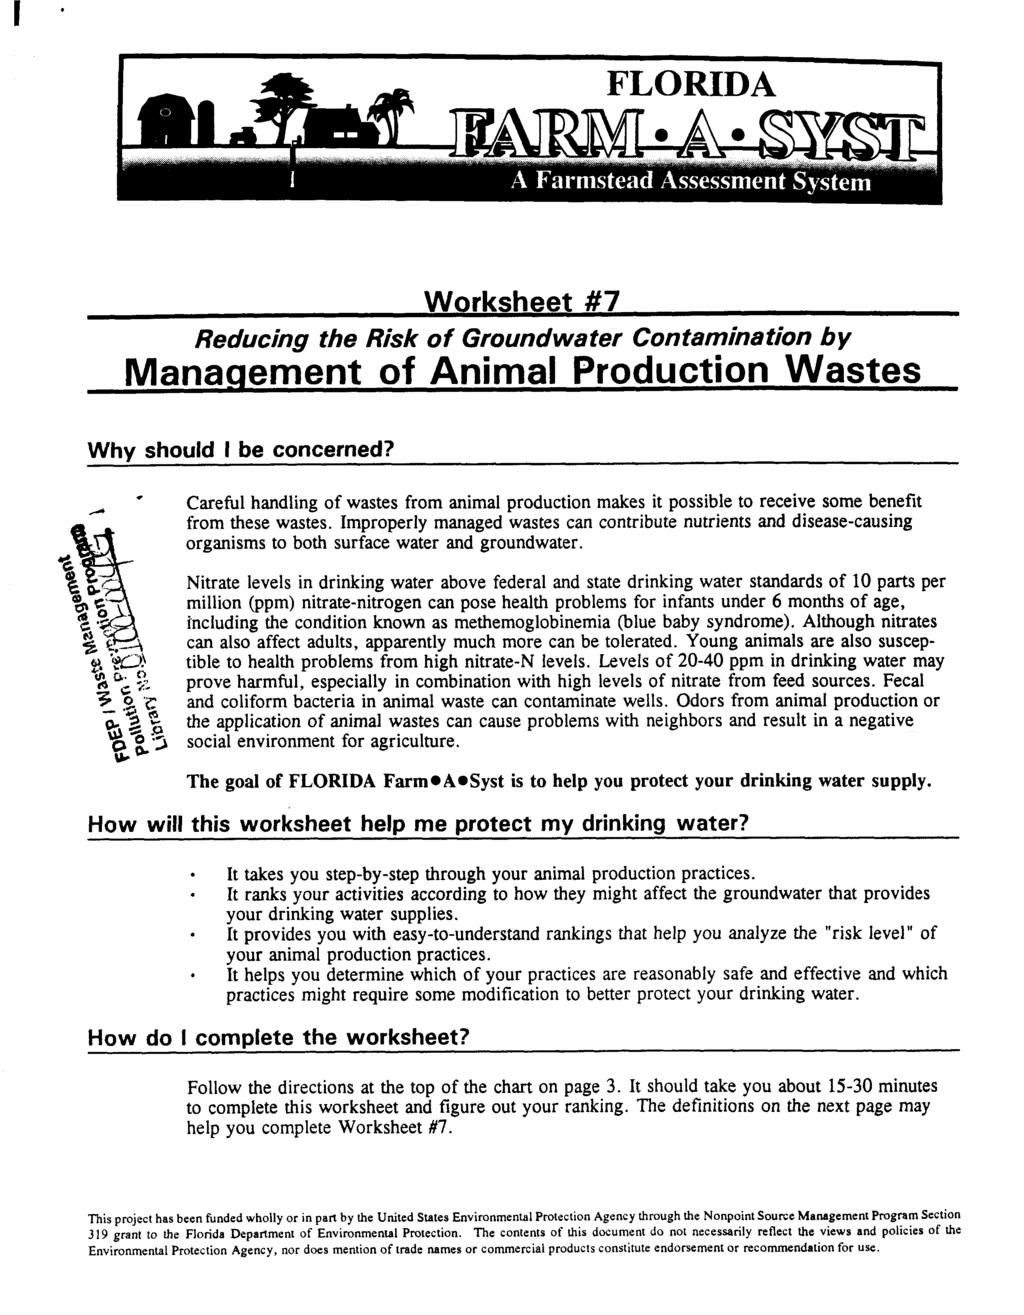 Worksheet #7 Reducing the Risk of Groundwater Contamination by Manaqement of Animal Production Wastes Whv should I be concerned? A. Careful handling of wastes from animal production makes it possible to receive some benefit from these wastes.